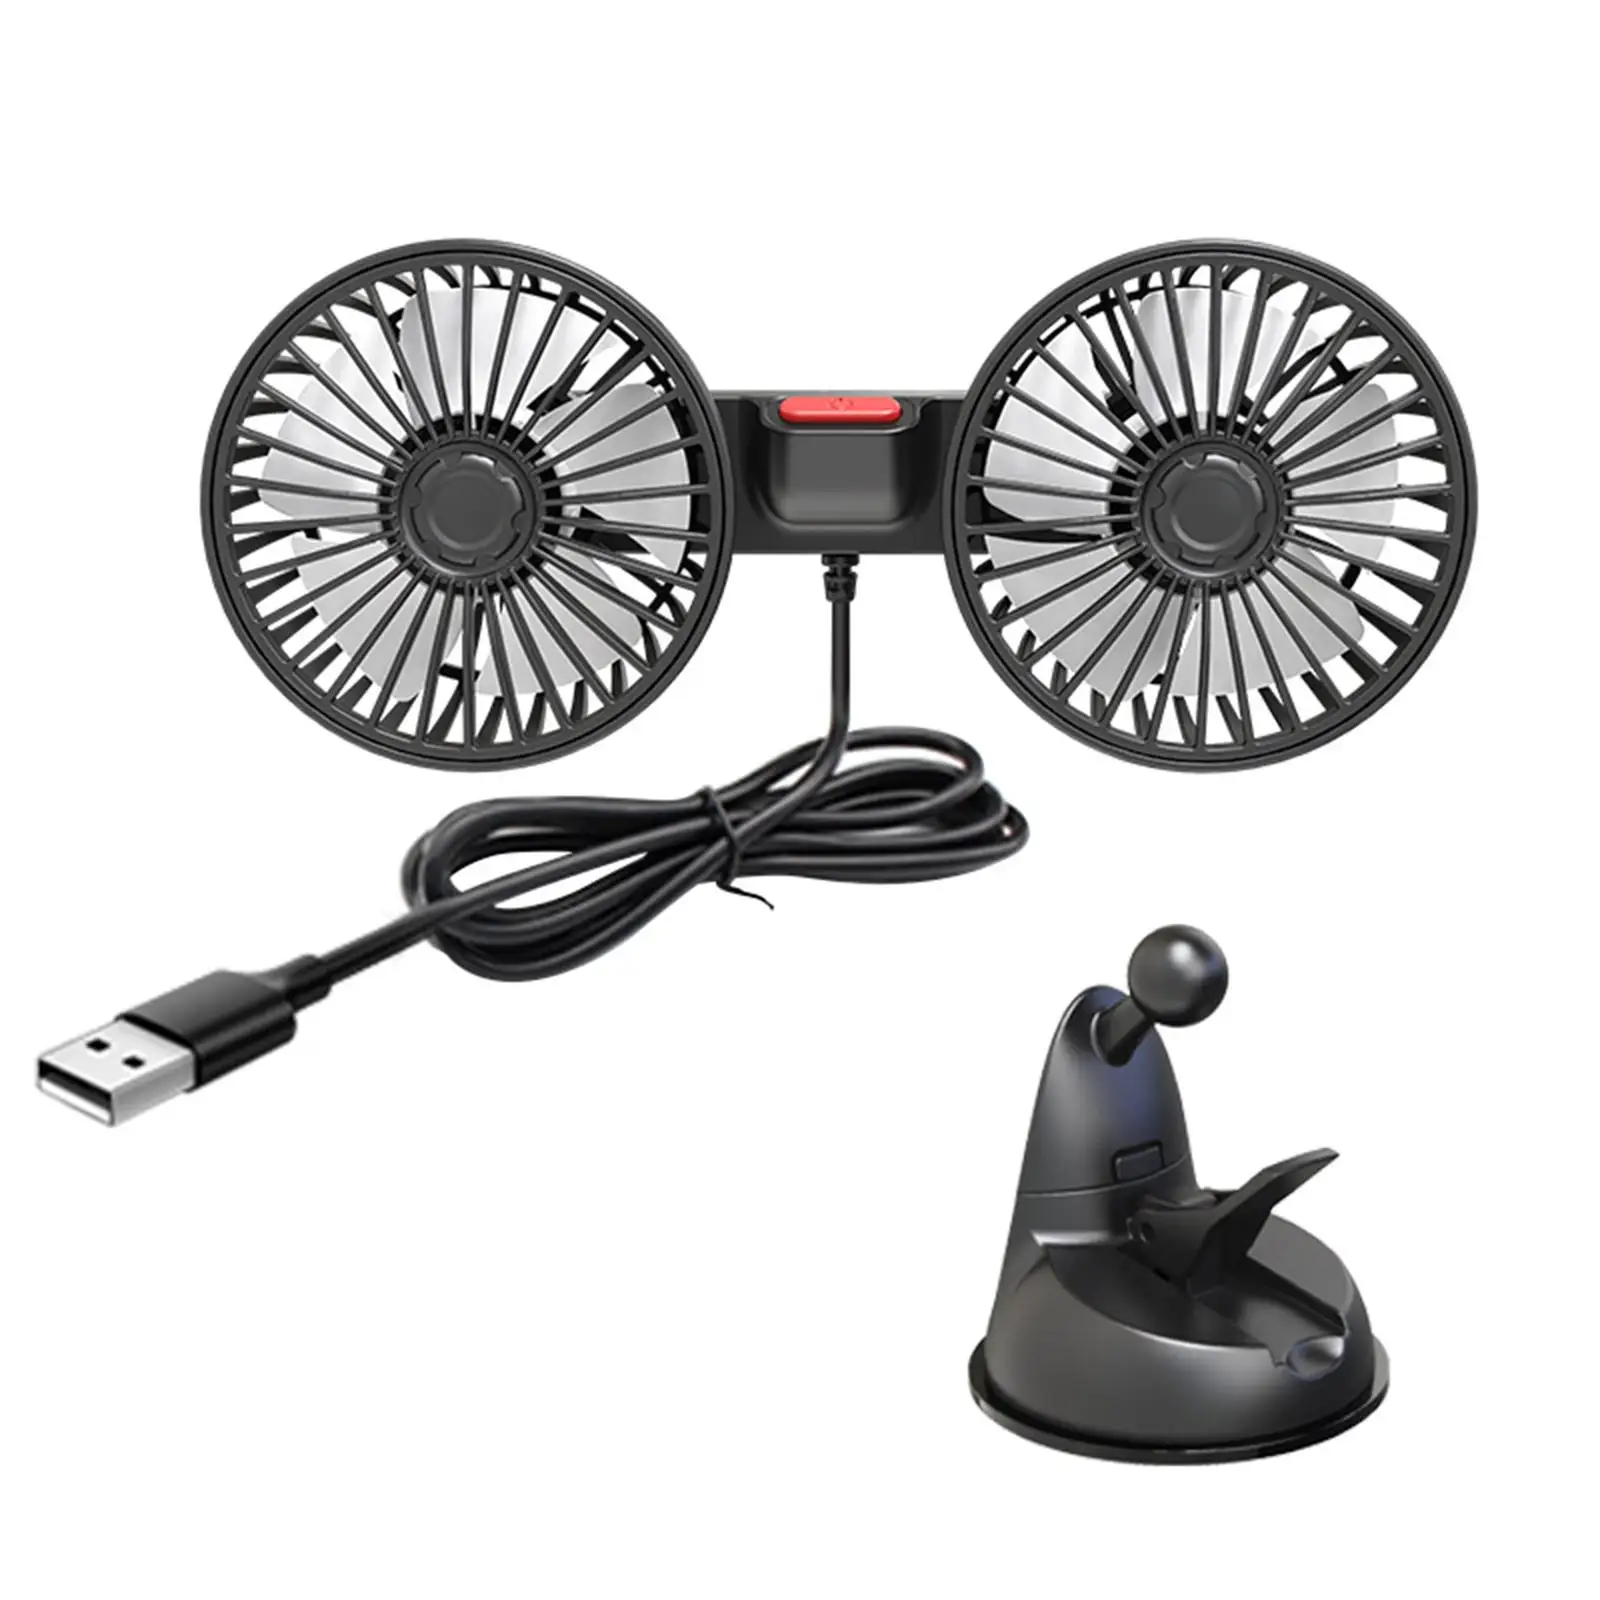 

Auto Cooling Fan Wind Regulation Three Speeds Control USB 5V 10W Low Noise Auto Cooler Air for Truck Office RV Sedan Home